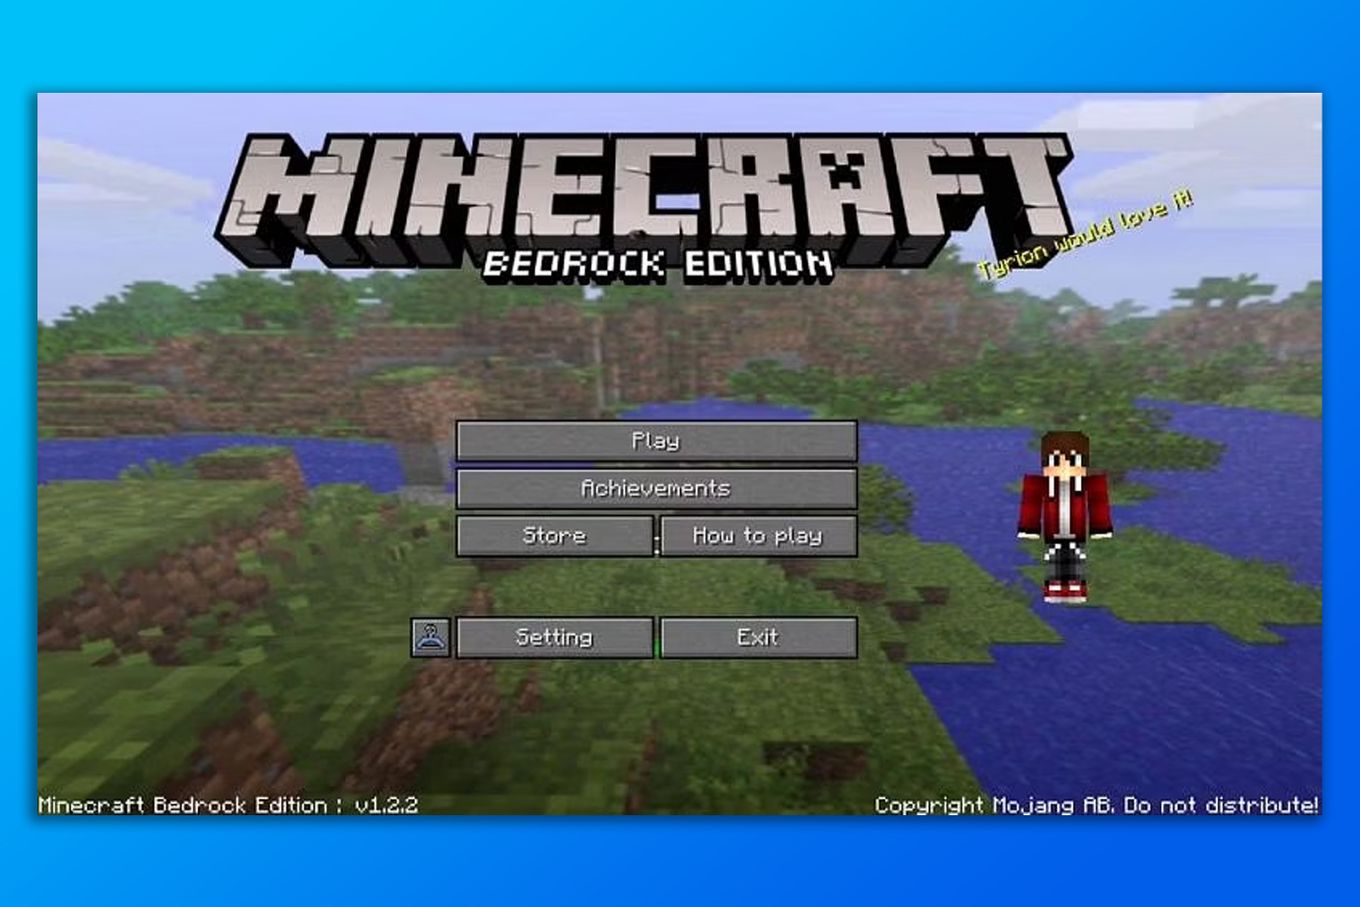  Minecraft Bedrock Edition for PS4